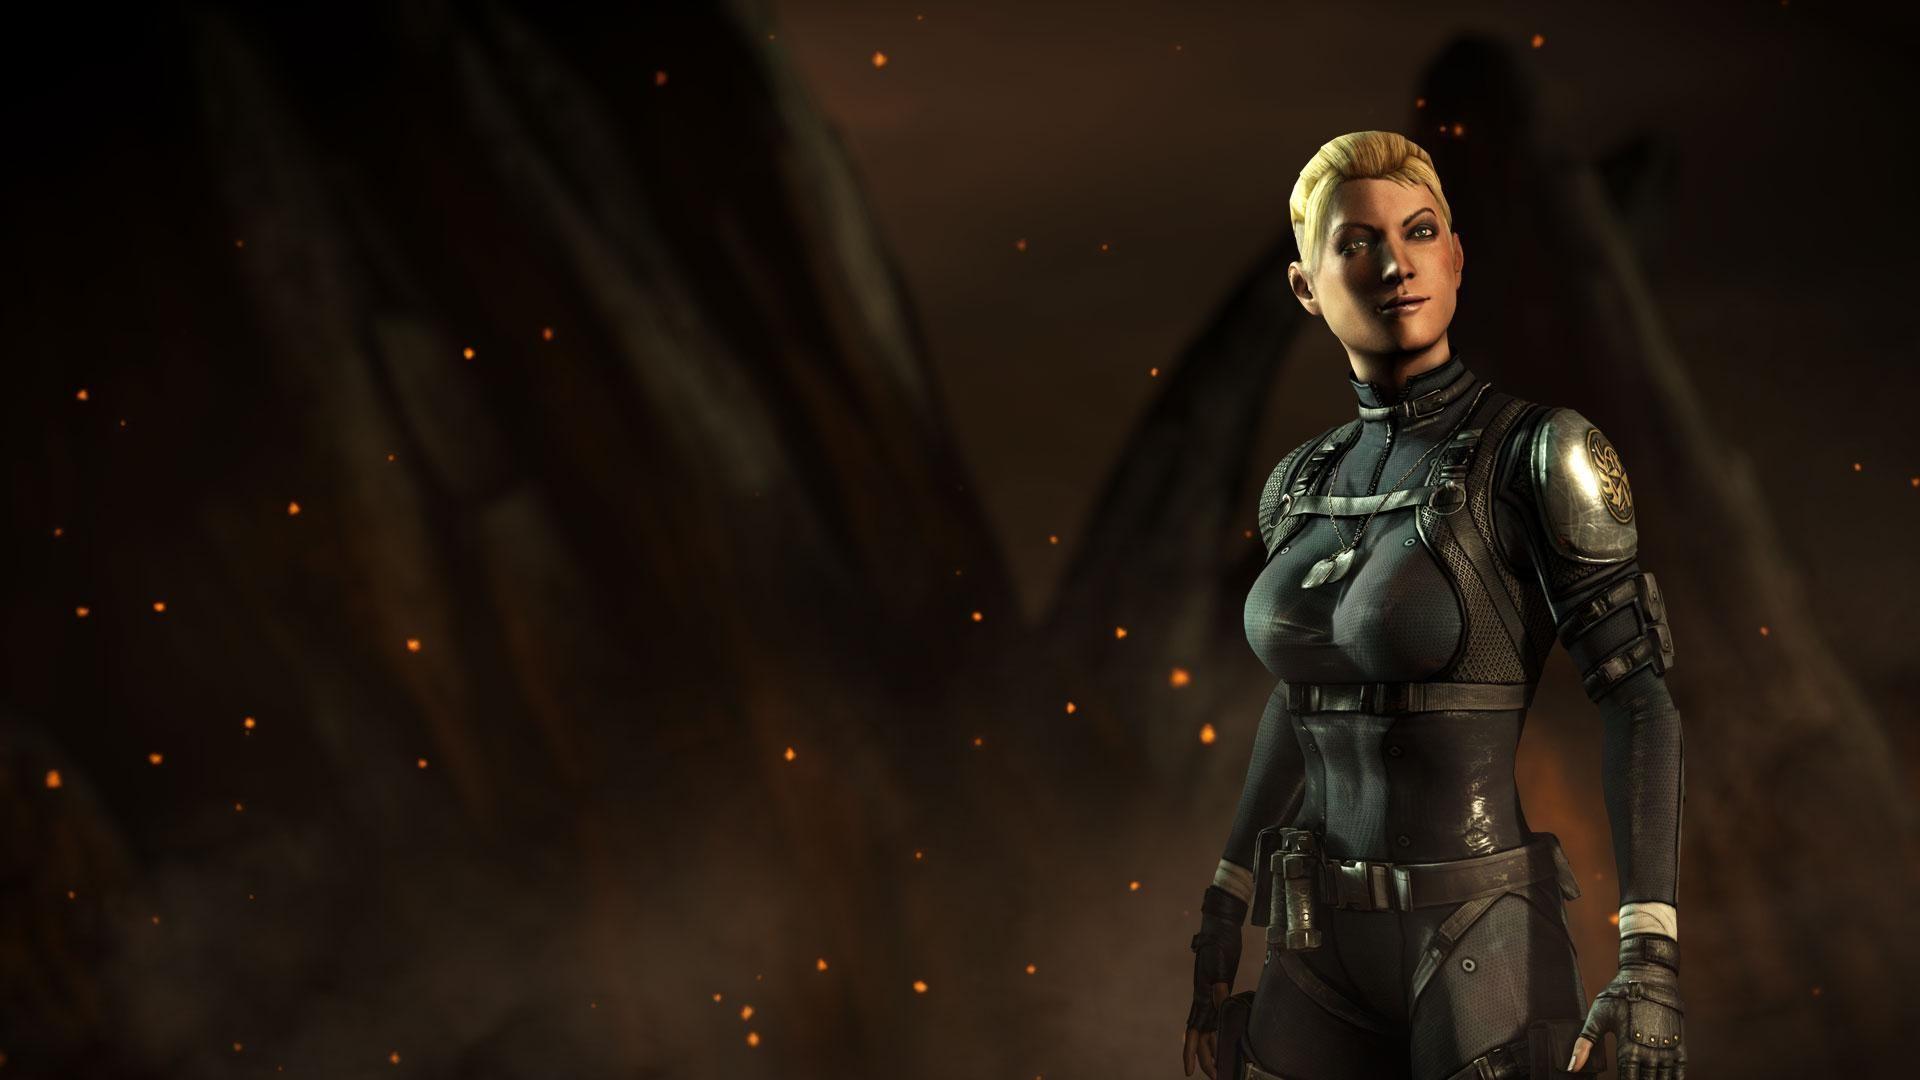 Cassie Cage Mk11 Wallpapers Top Free Cassie Cage Mk11 Backgrounds Wallpaperaccess 5653